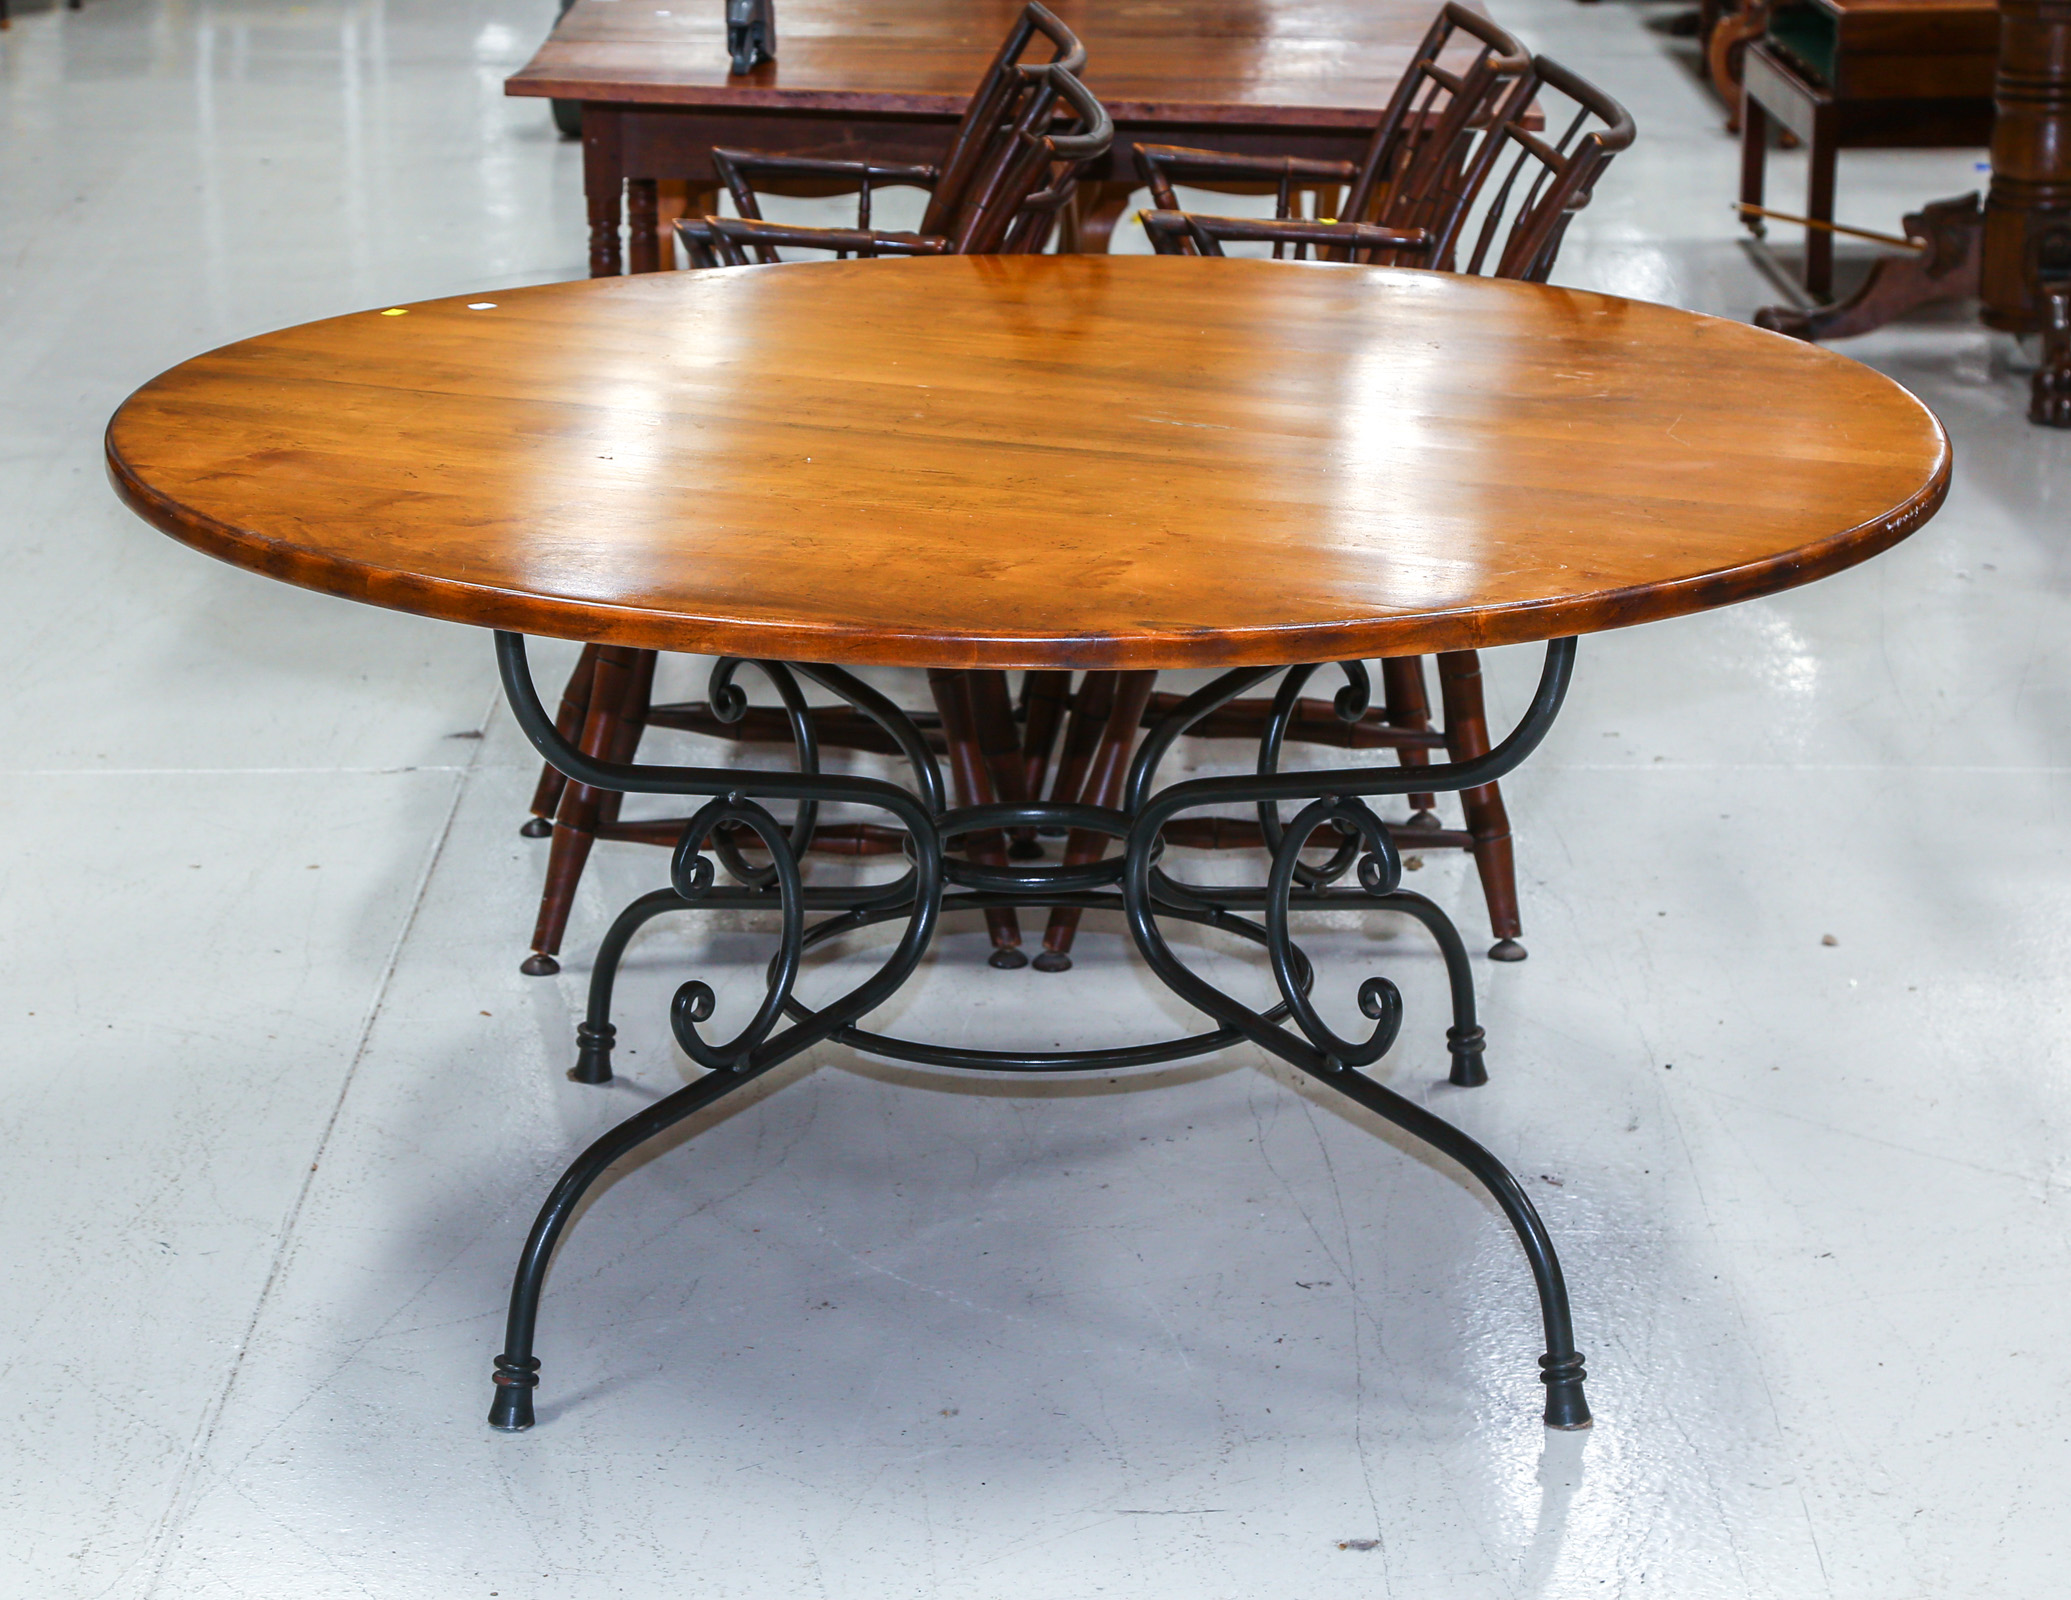 CONTEMPORARY STYLE ROUND TABLE